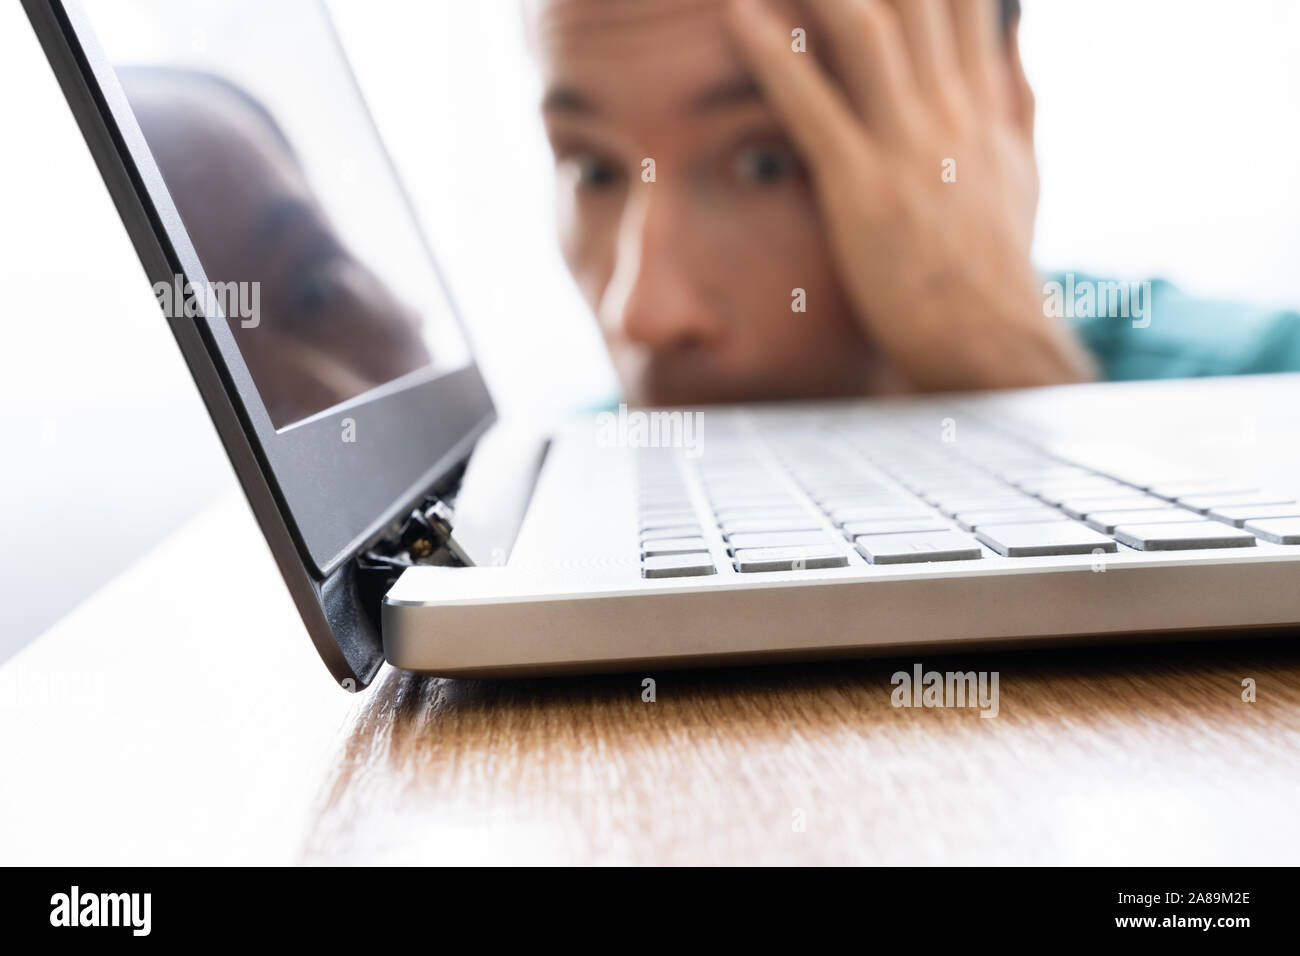 Man Looking At Damaged Laptop Computer With Broken Screen Attachment Stock Photo